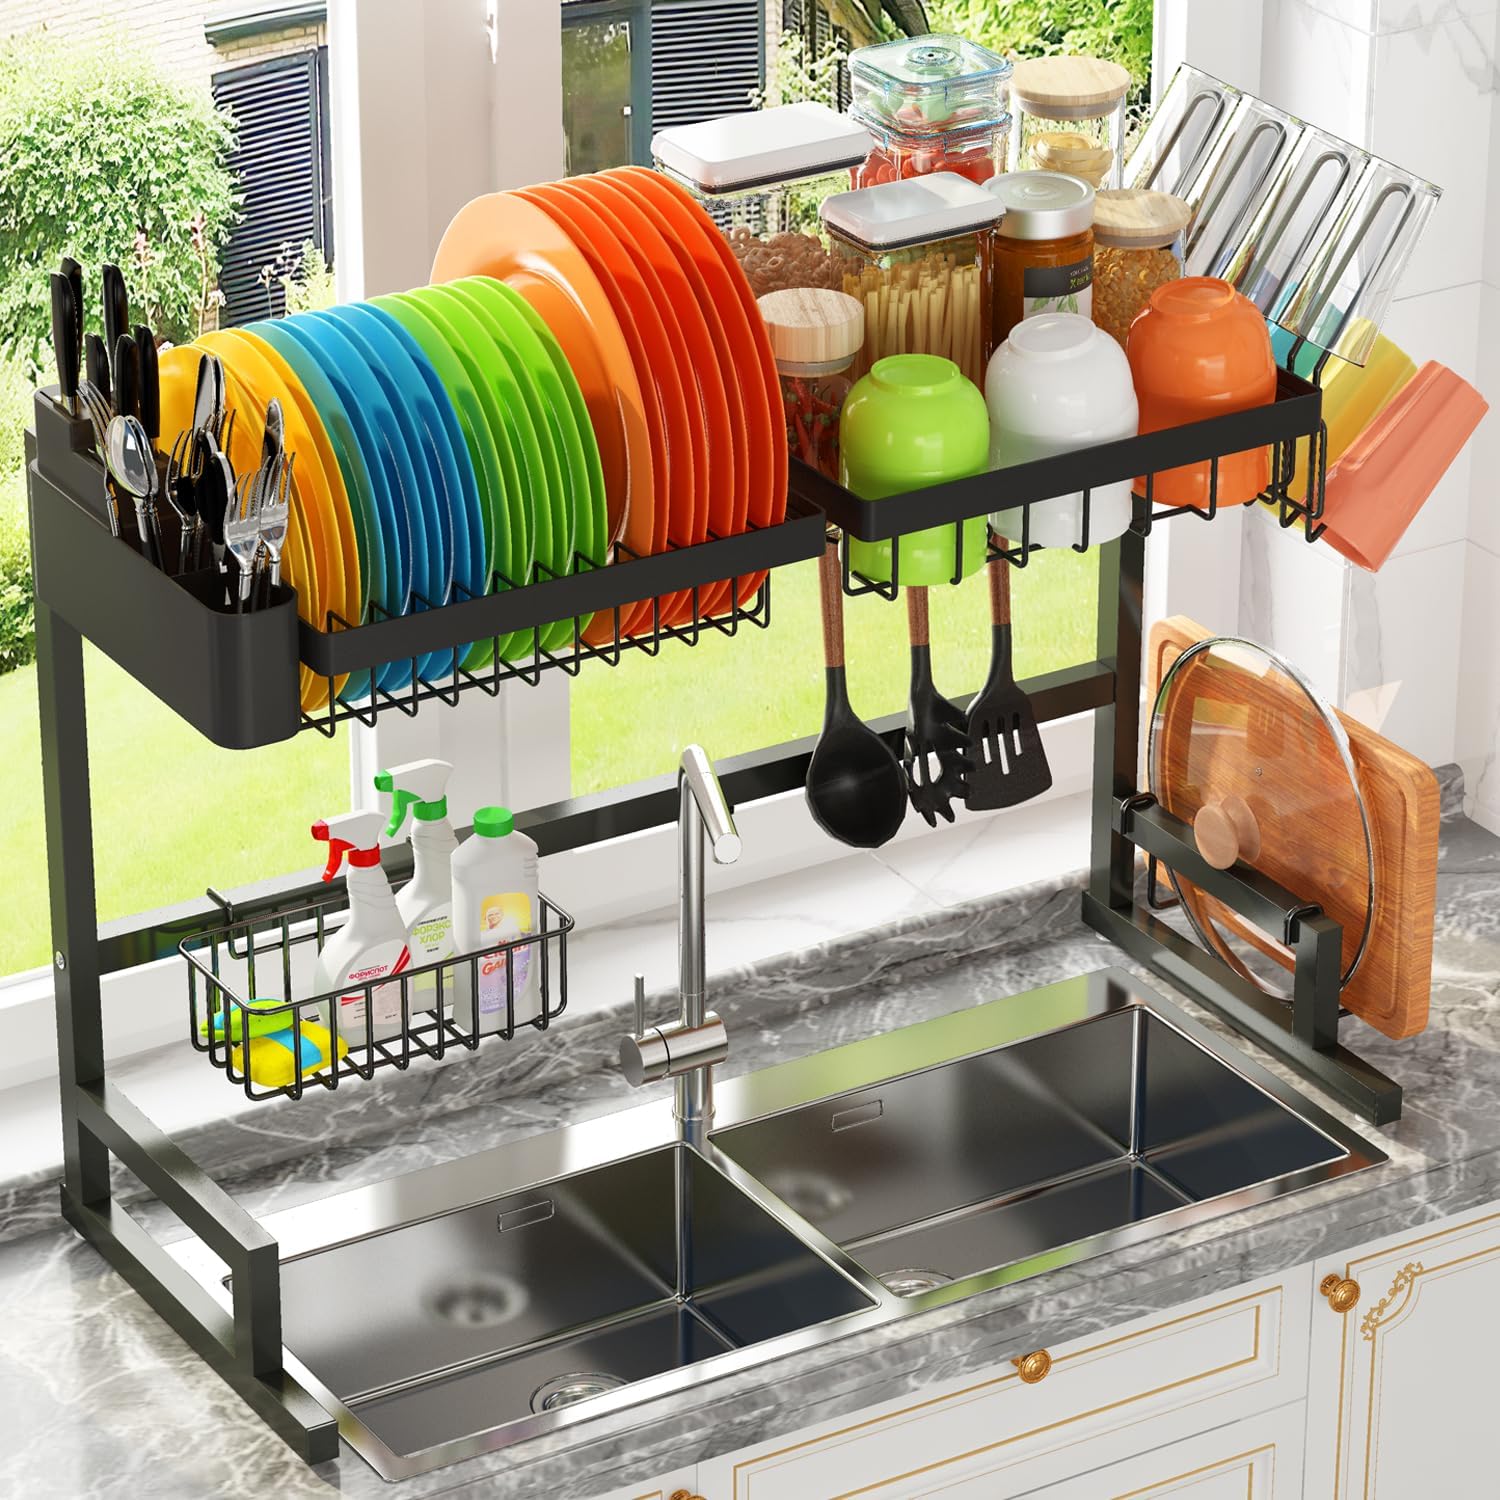 Dropship Dish Drying Rack Stainless Steel Dish Rack W/ Drainboard Cutlery  Holder Kitchen Dish Organizer to Sell Online at a Lower Price